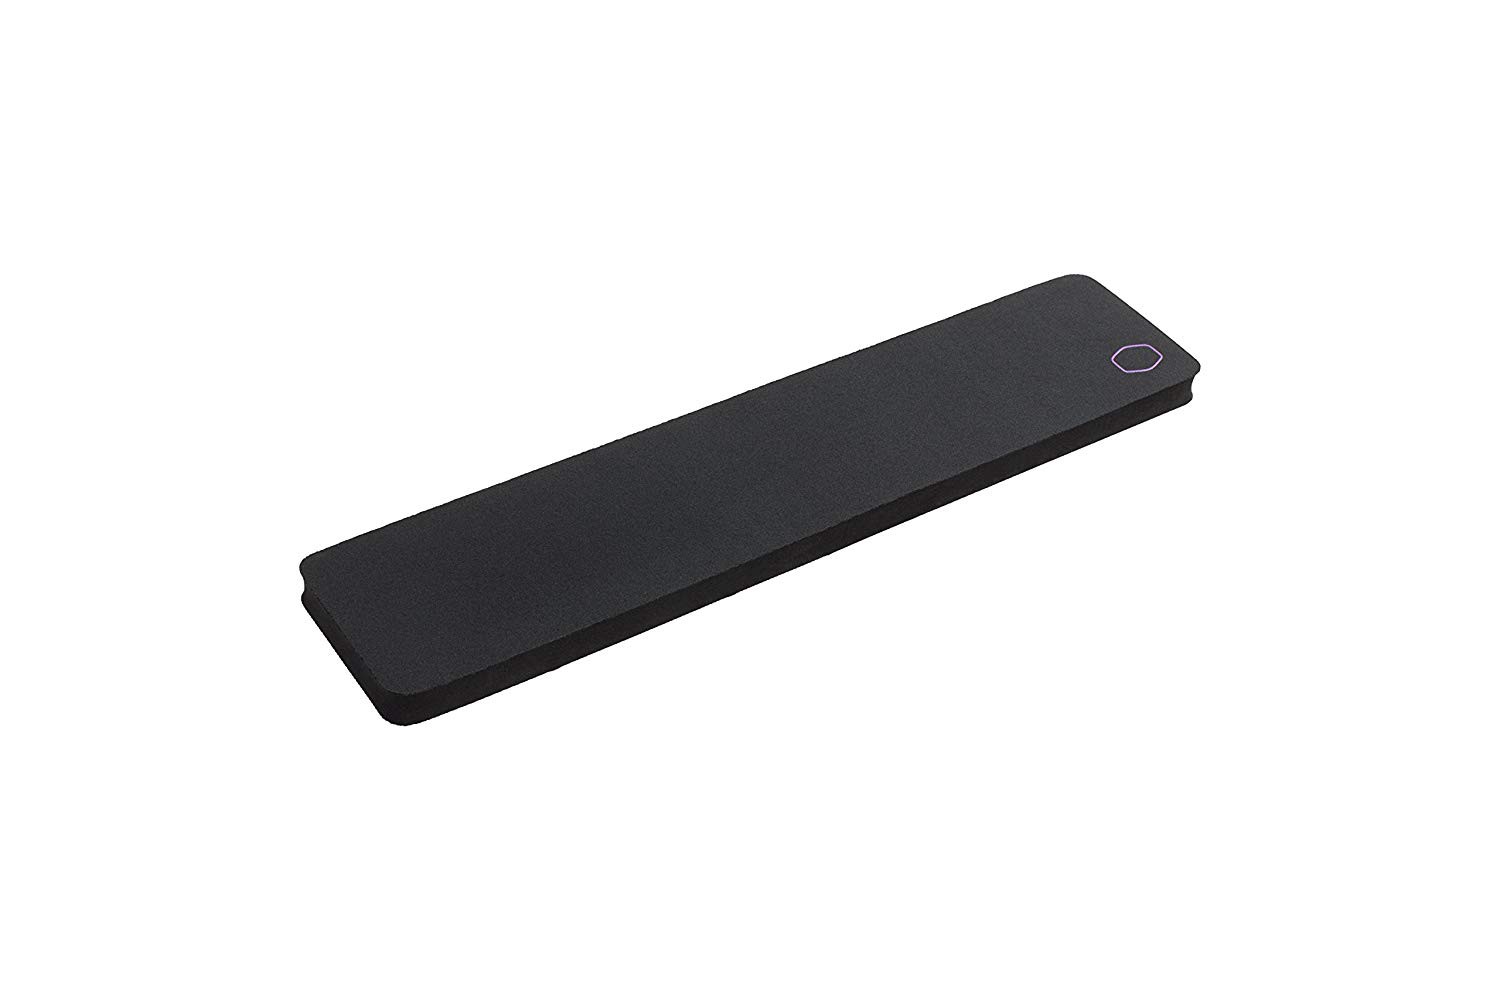 COOLER MASTER MASTERACCESSORY WR530 SIZE SMALL WRIST REST PAD FOR KEYBOARD